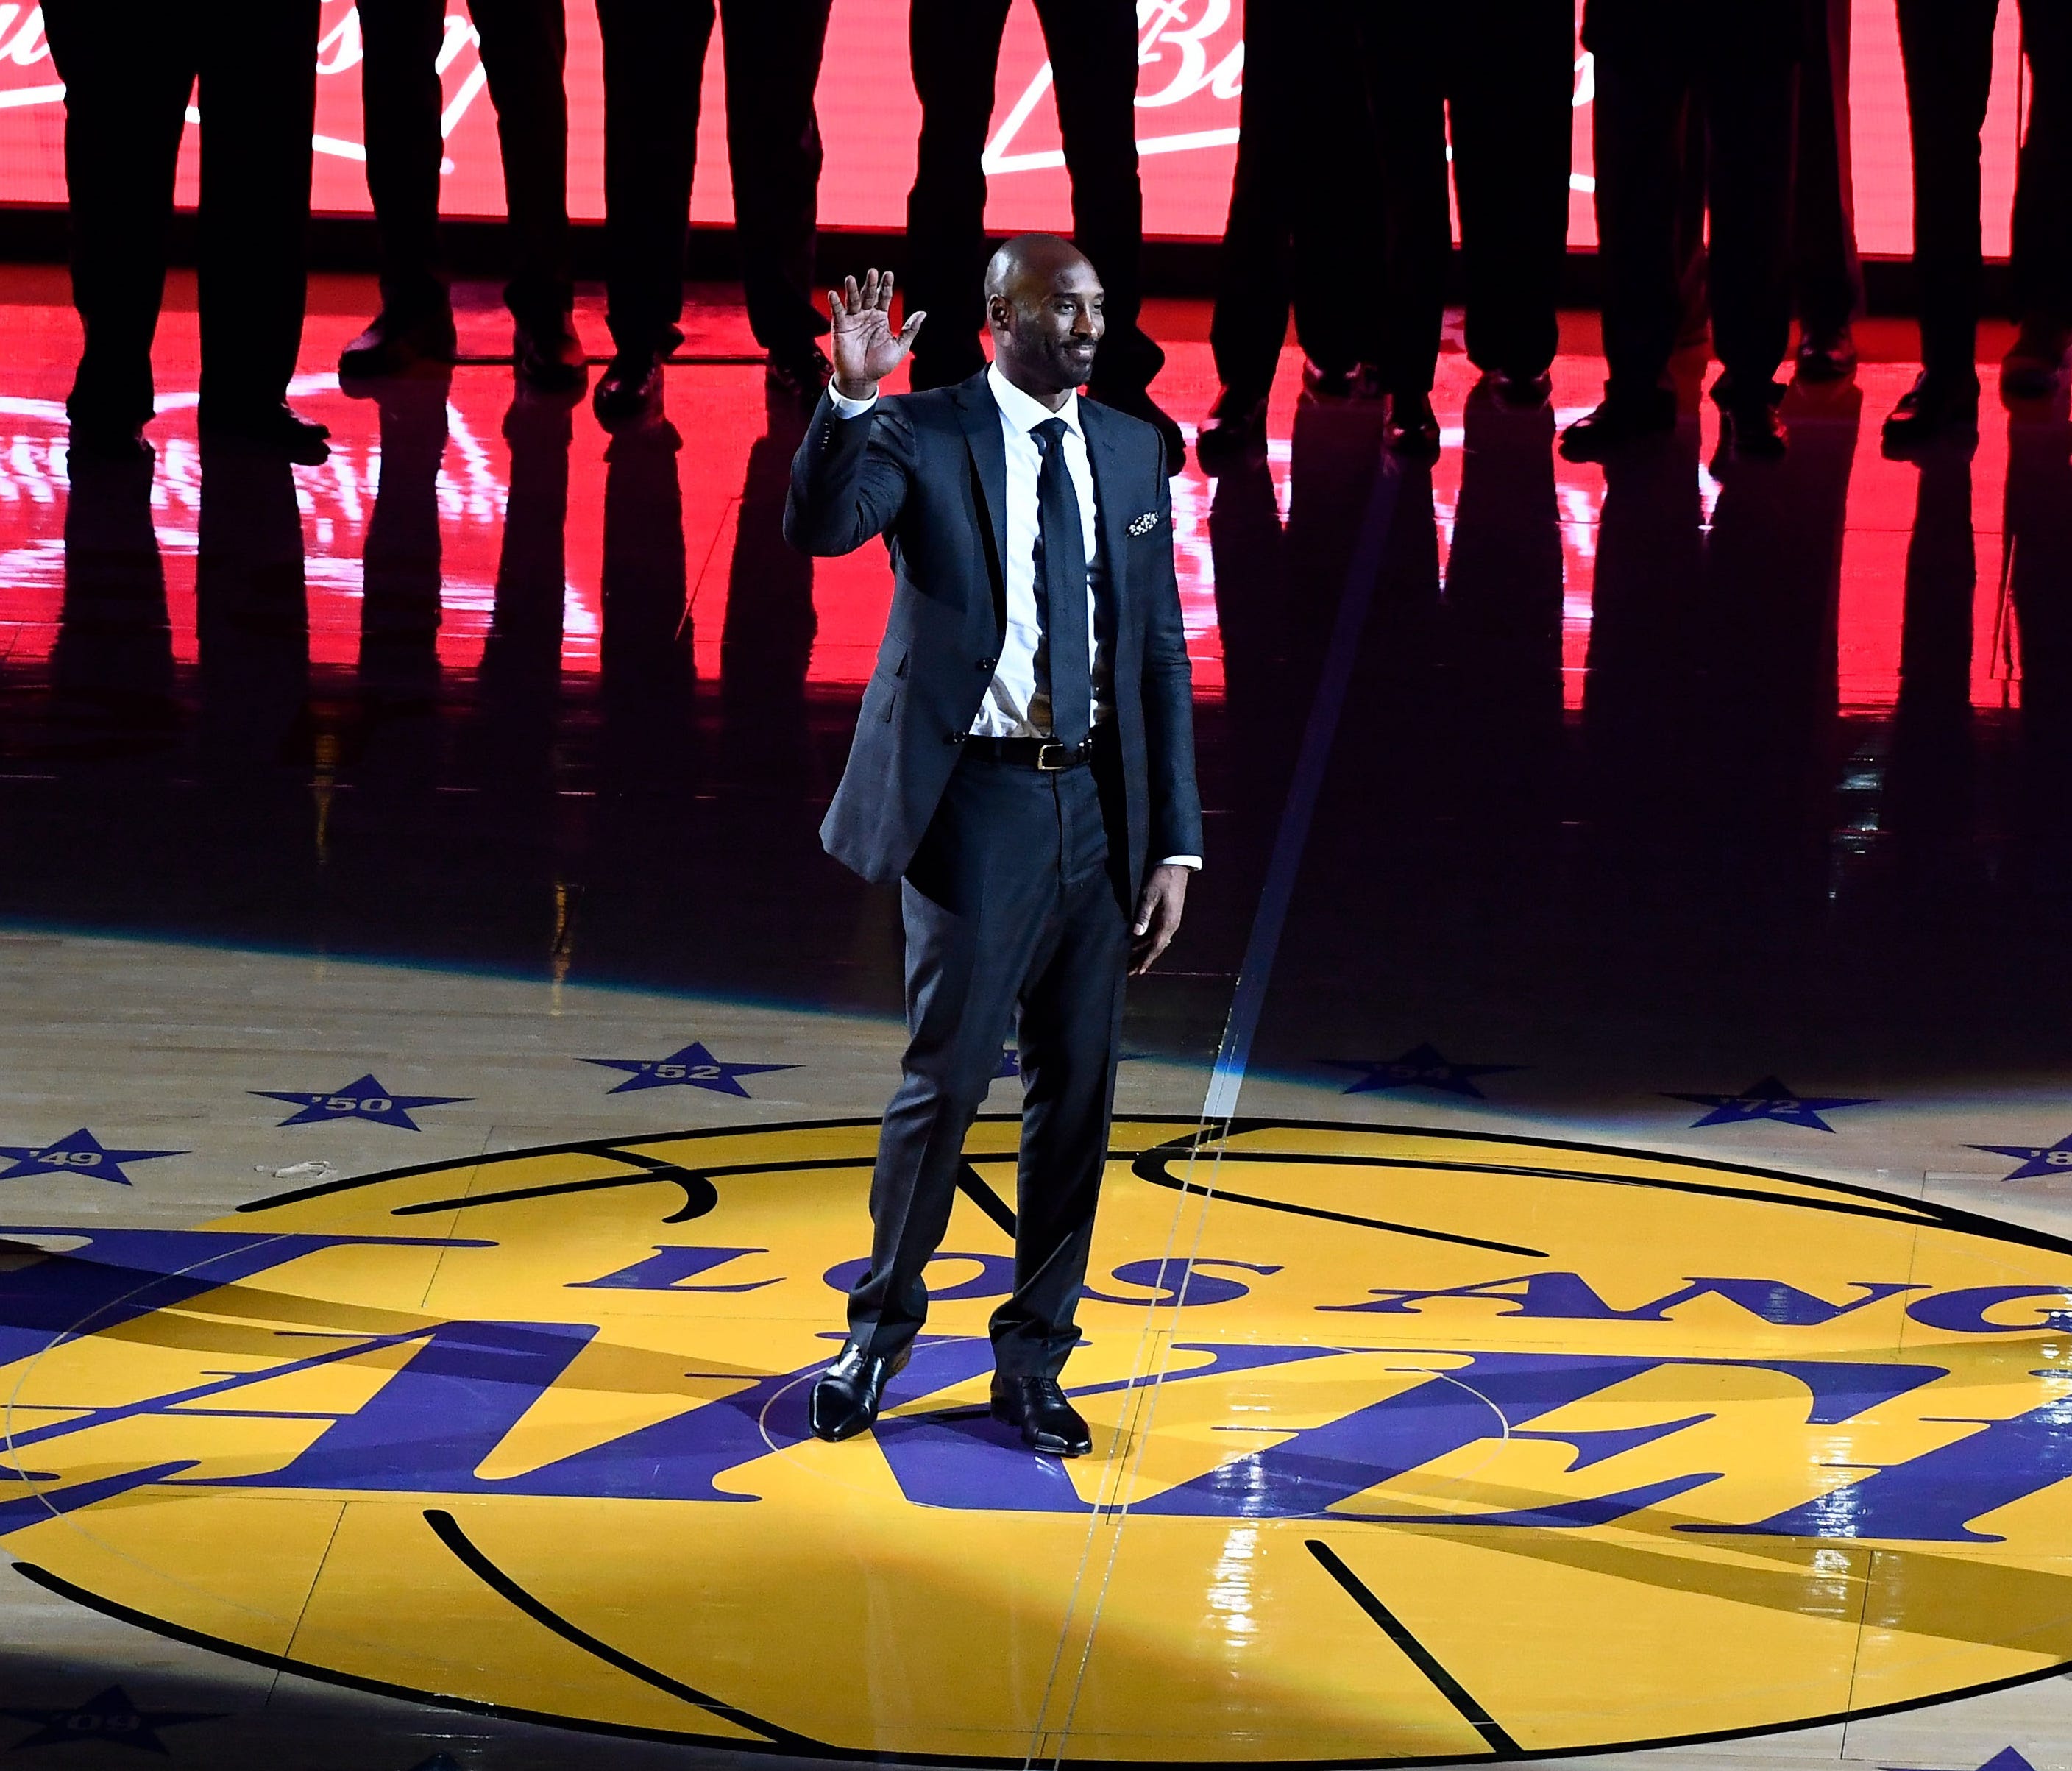 Kobe Bryant became the first Lakers player to have two numbers retired.